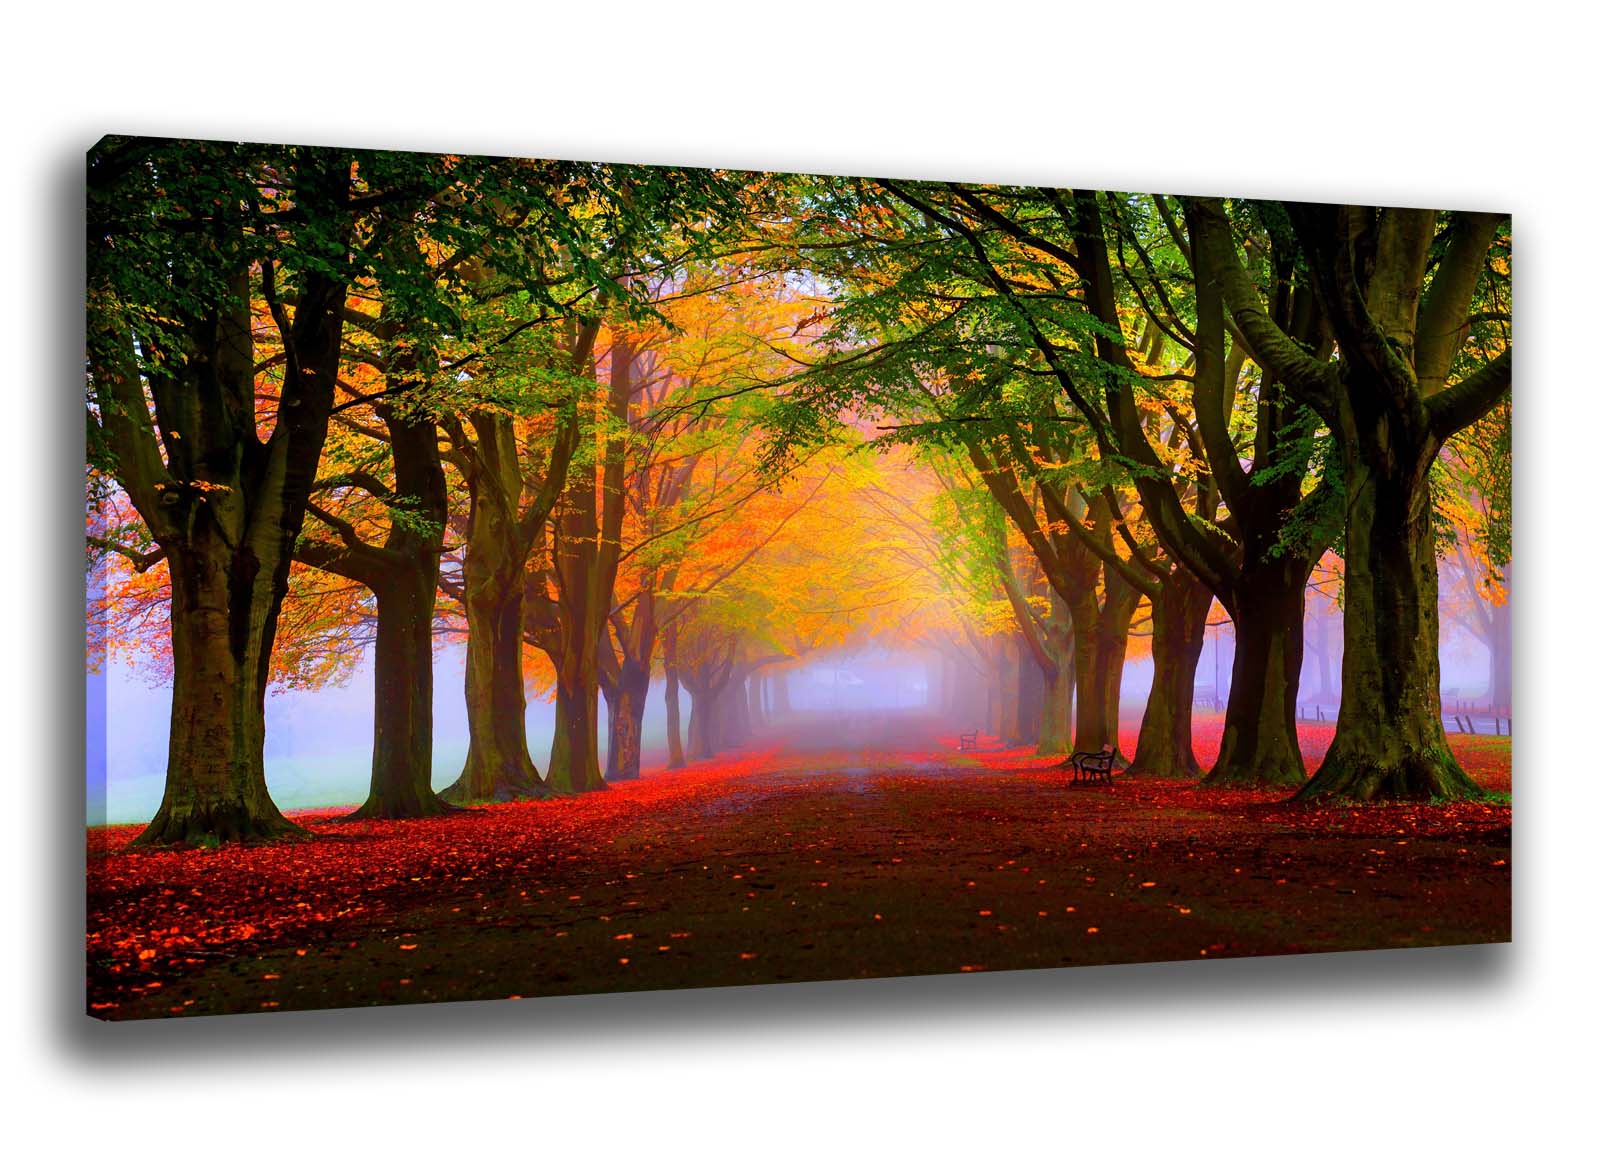 Large Wall Art Canvas Print of Autumn Fall Forrest Framed | eBay